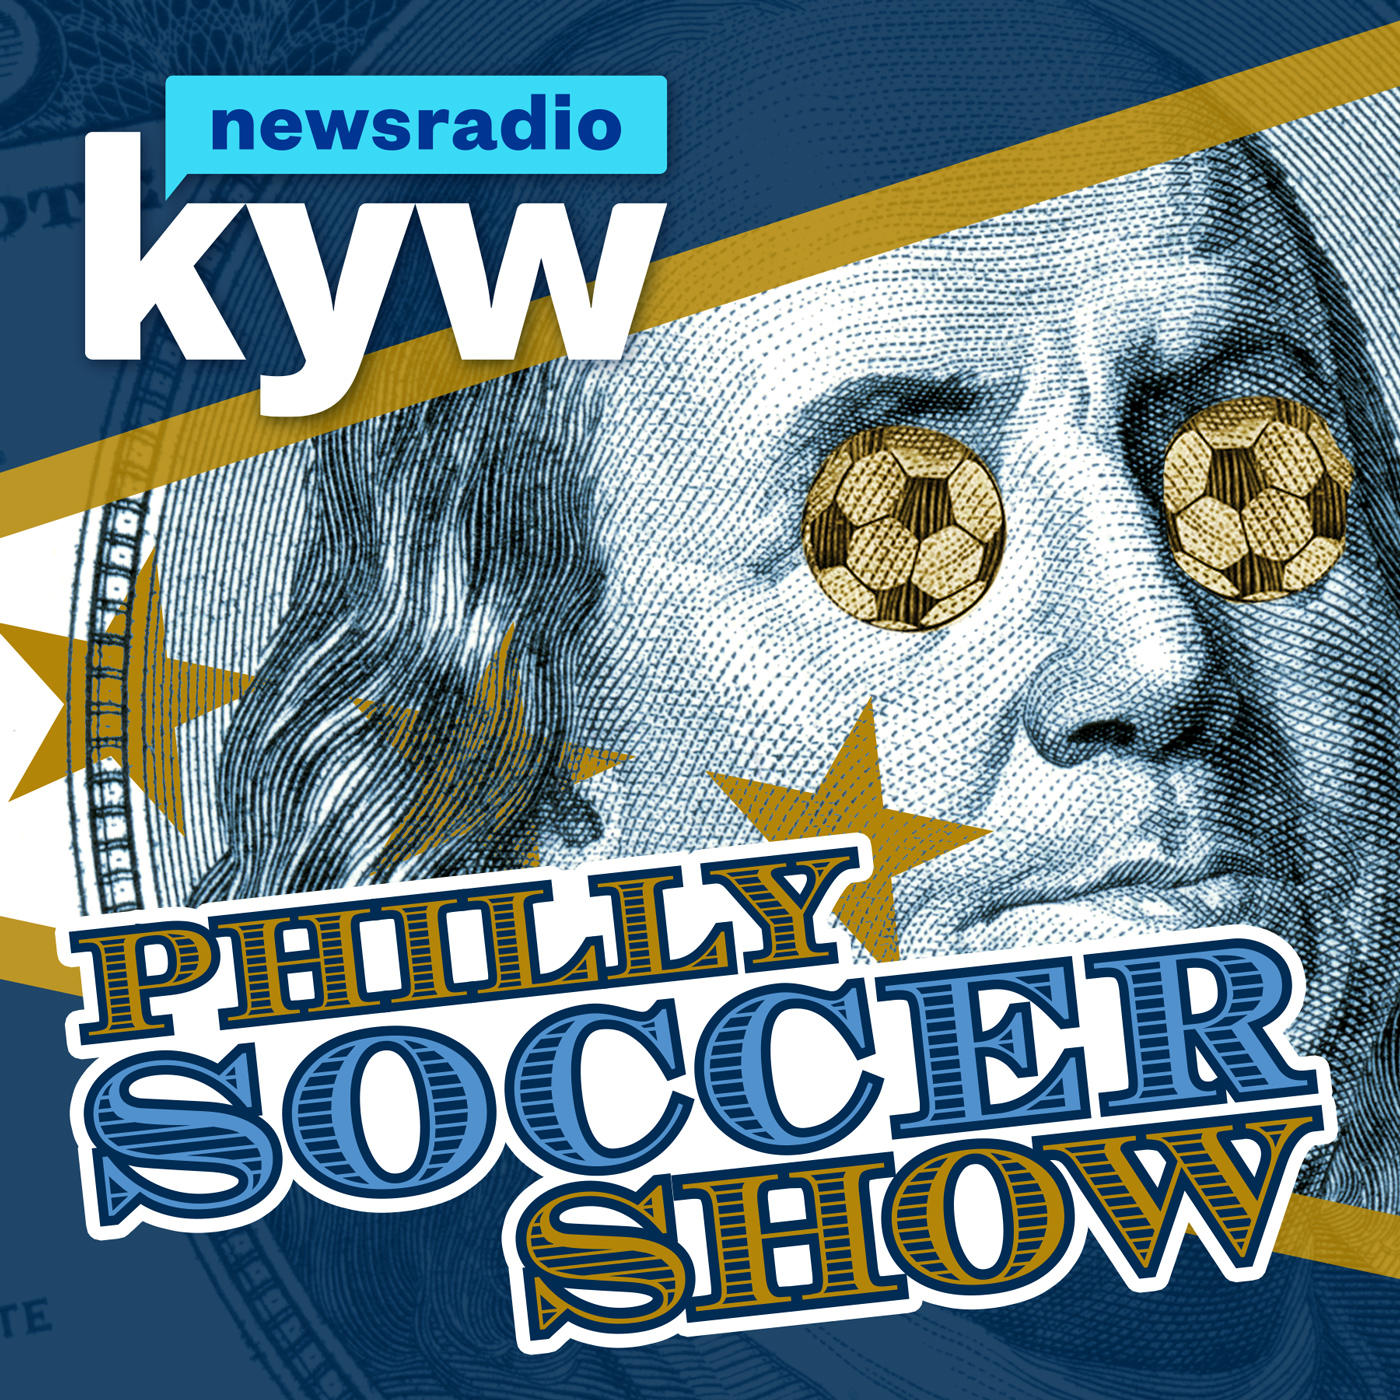 EXTRA: Philly Soccer Show hits the road Saturday, July 20, 2019